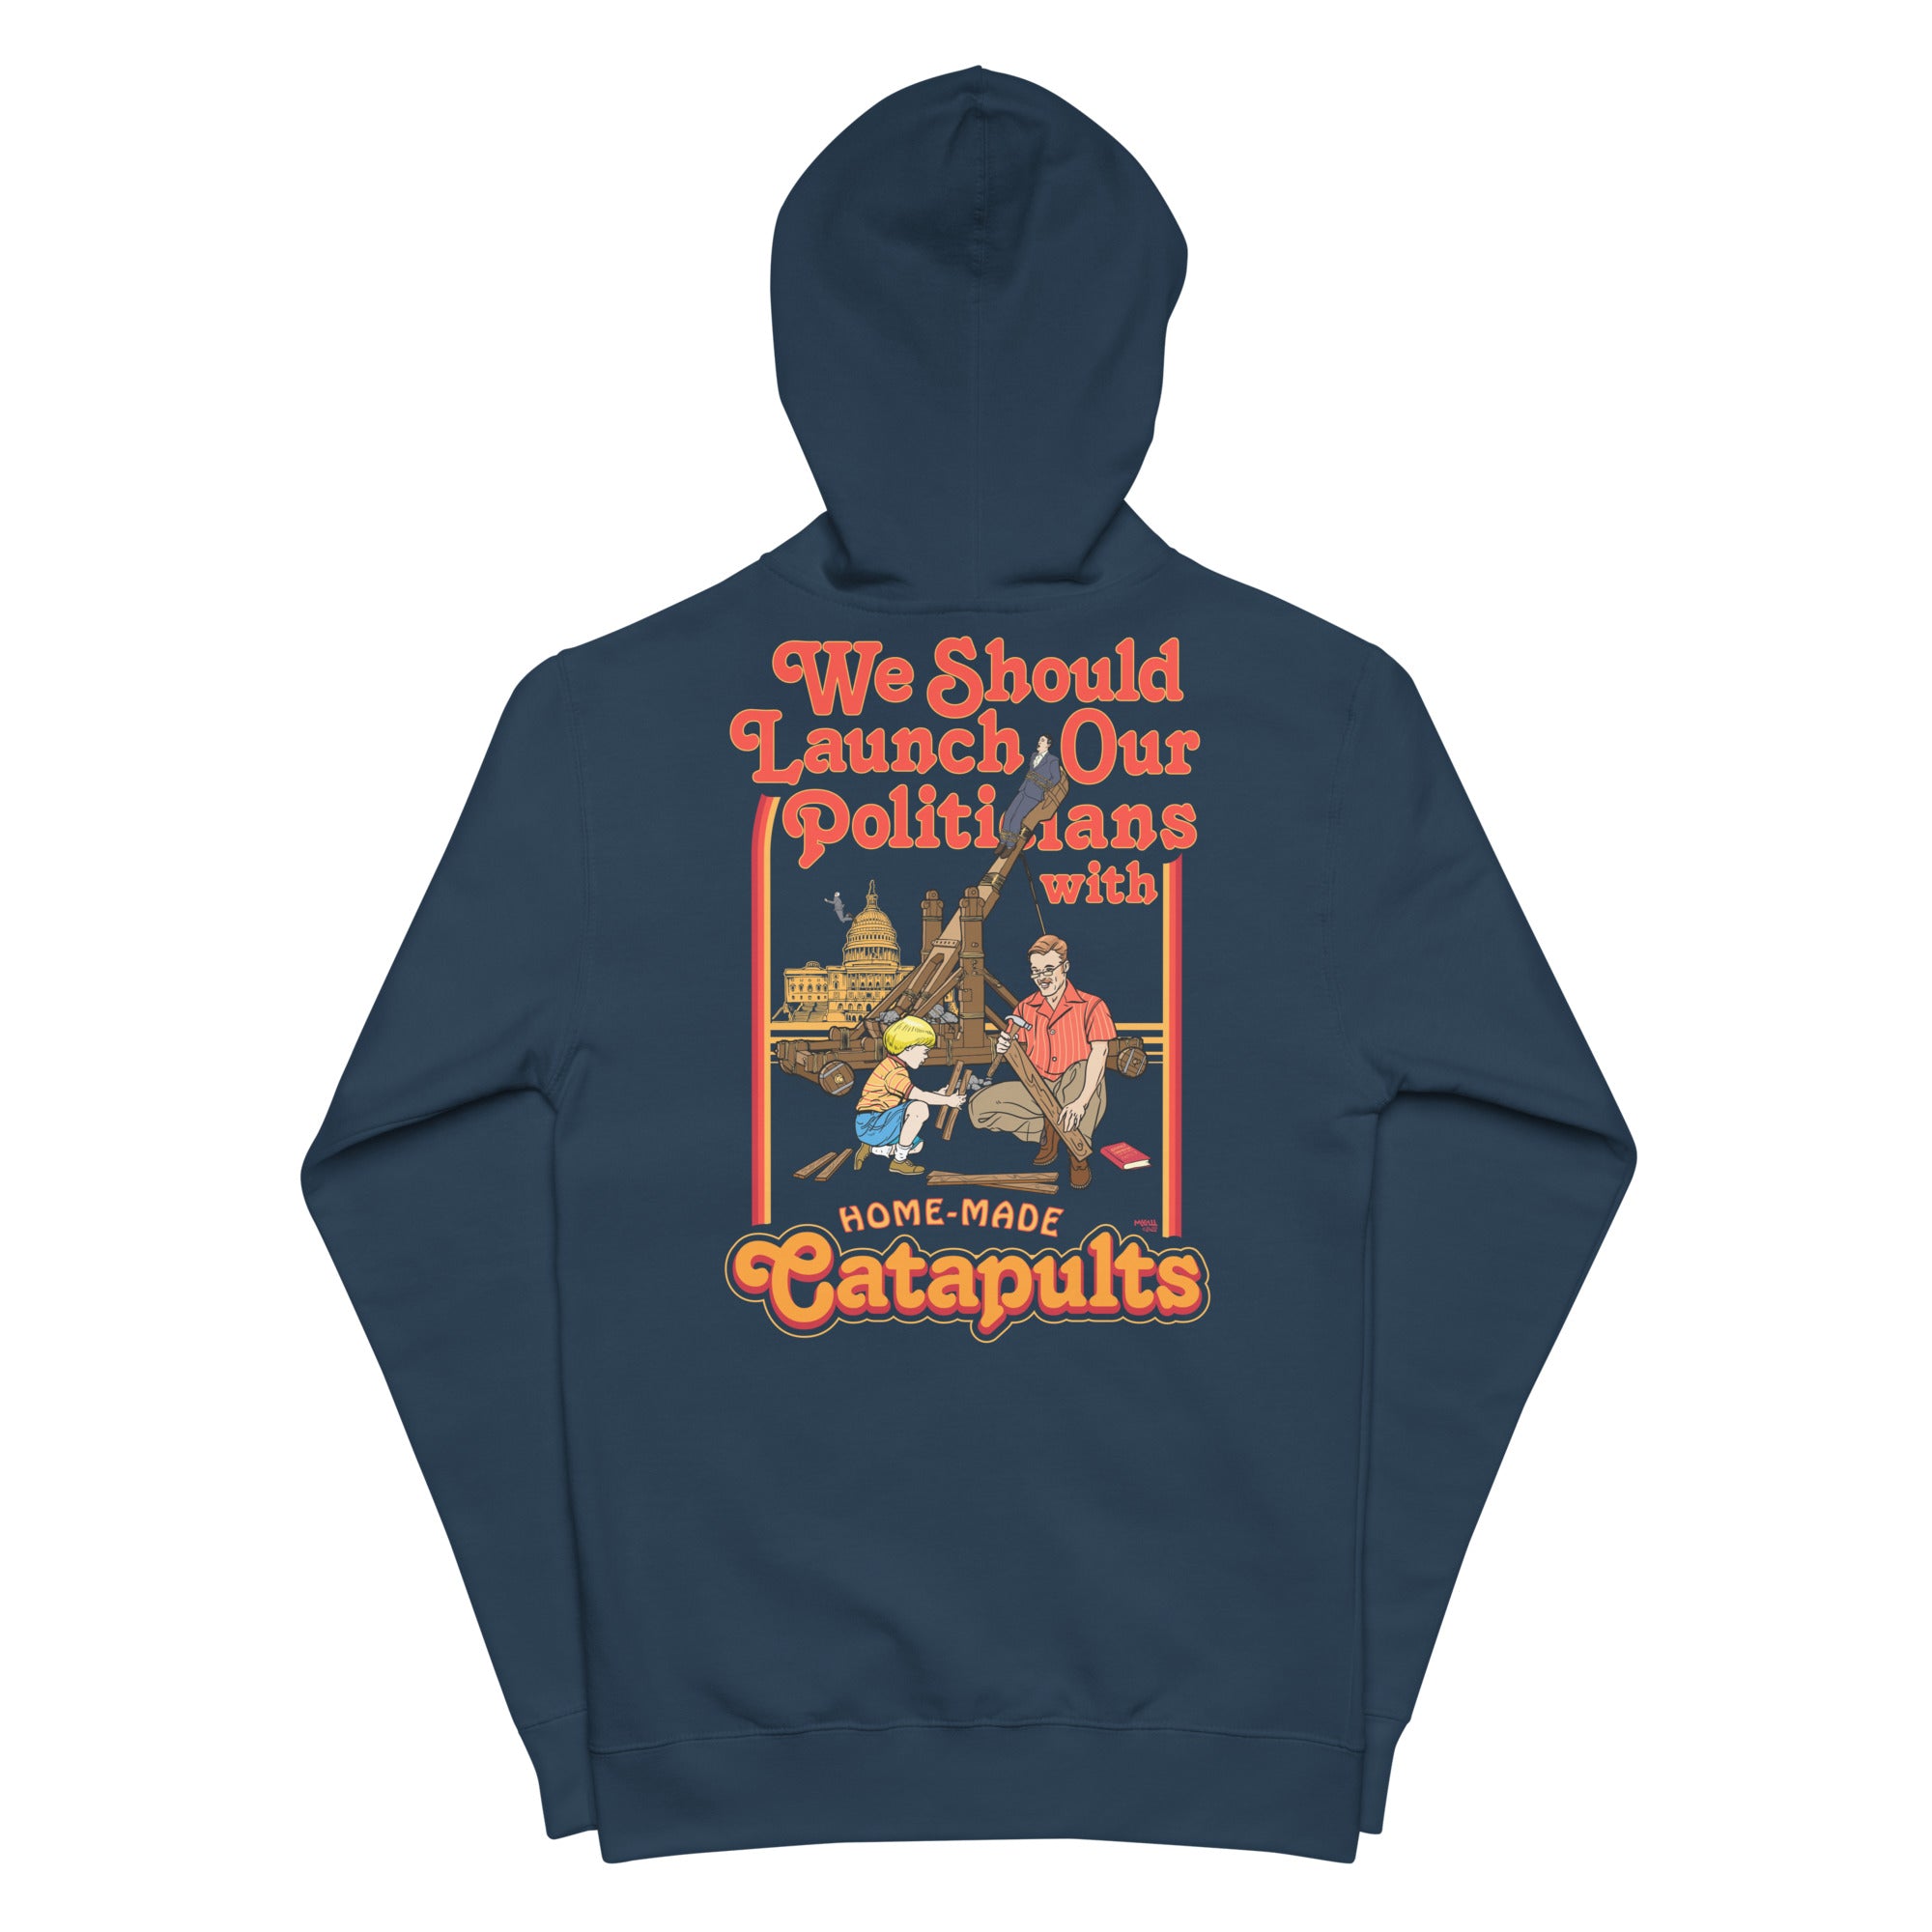 We Should Launch Our Politicians with Homemade Catapults Fleece Zip Up Hoodie